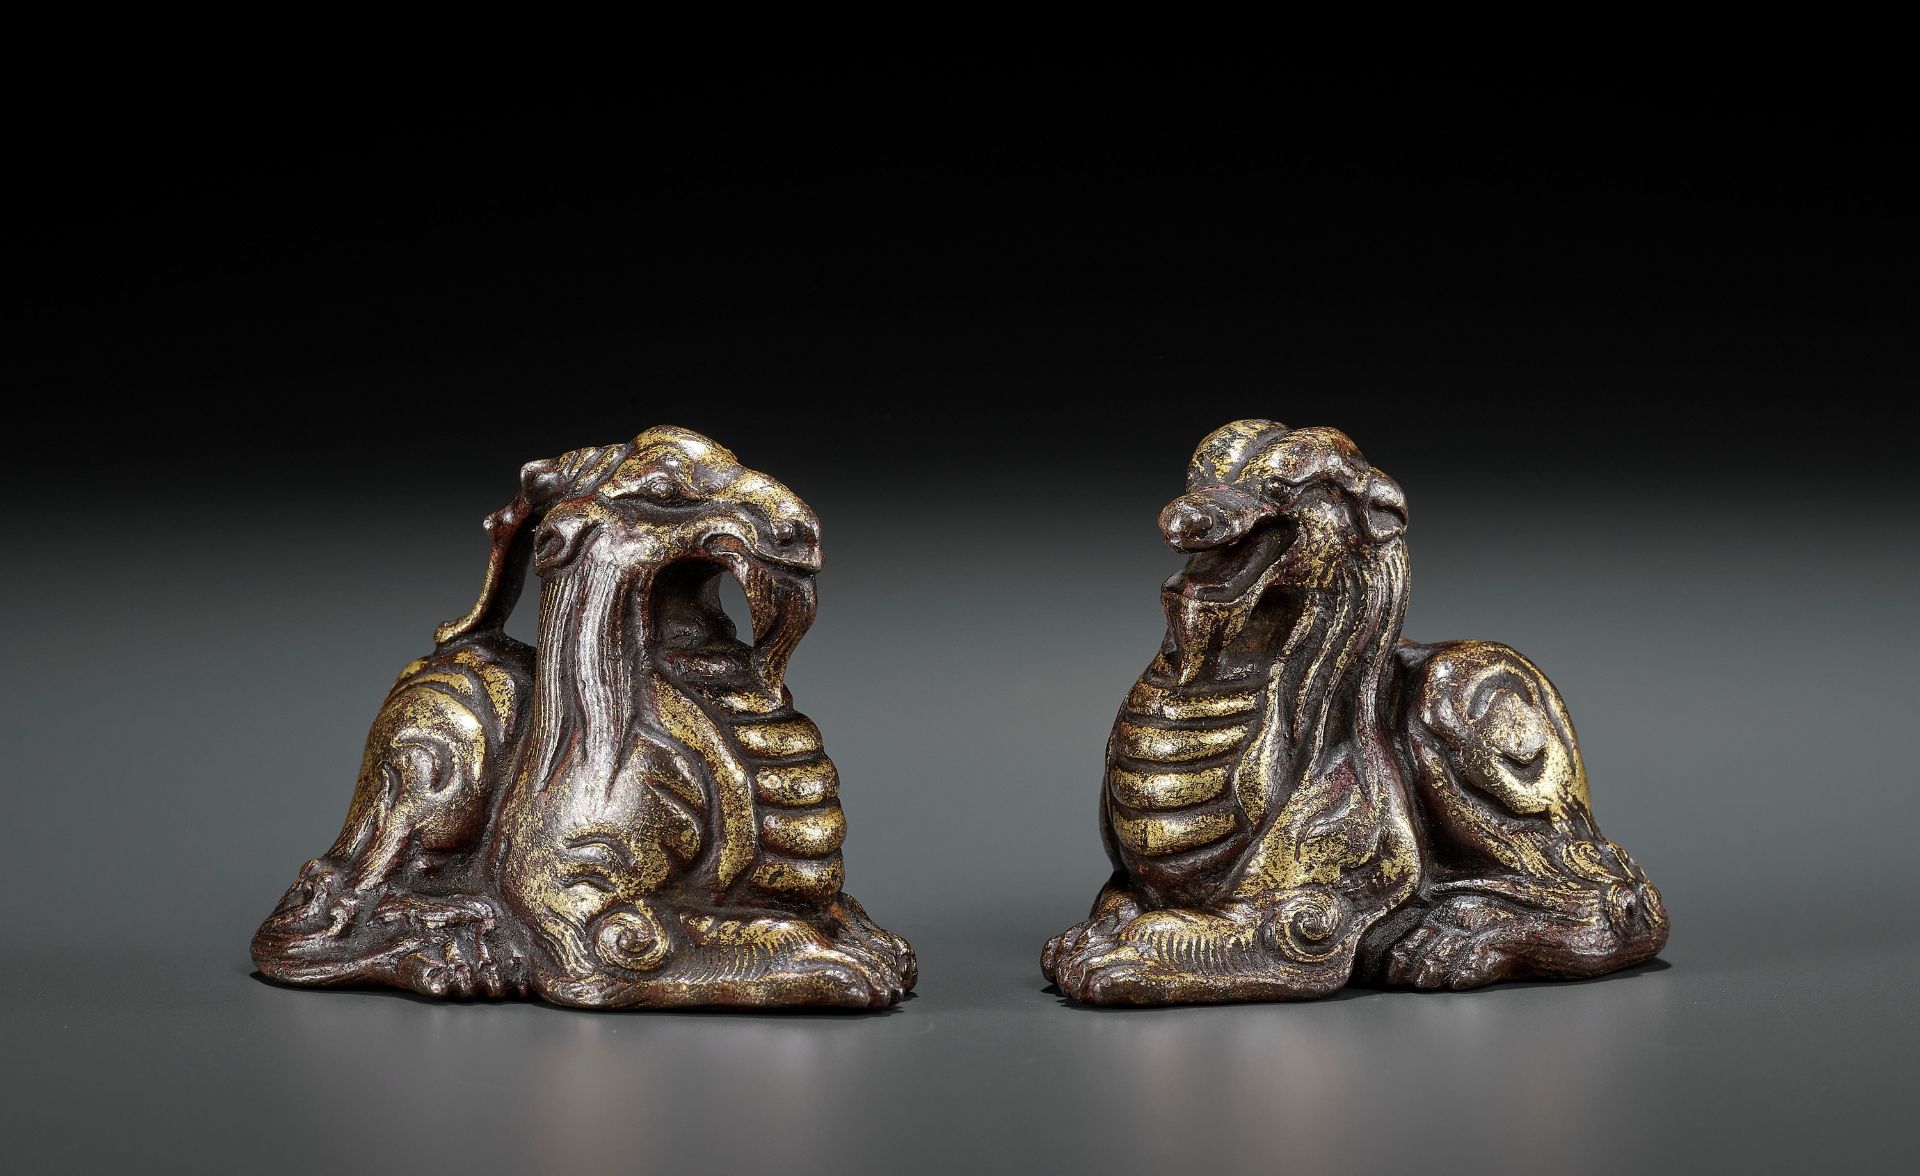 A PAIR OF GILT BRONZE 'MYTHICAL BEAST' WEIGHTS, EASTERN ZHOU TO WESTERN HAN